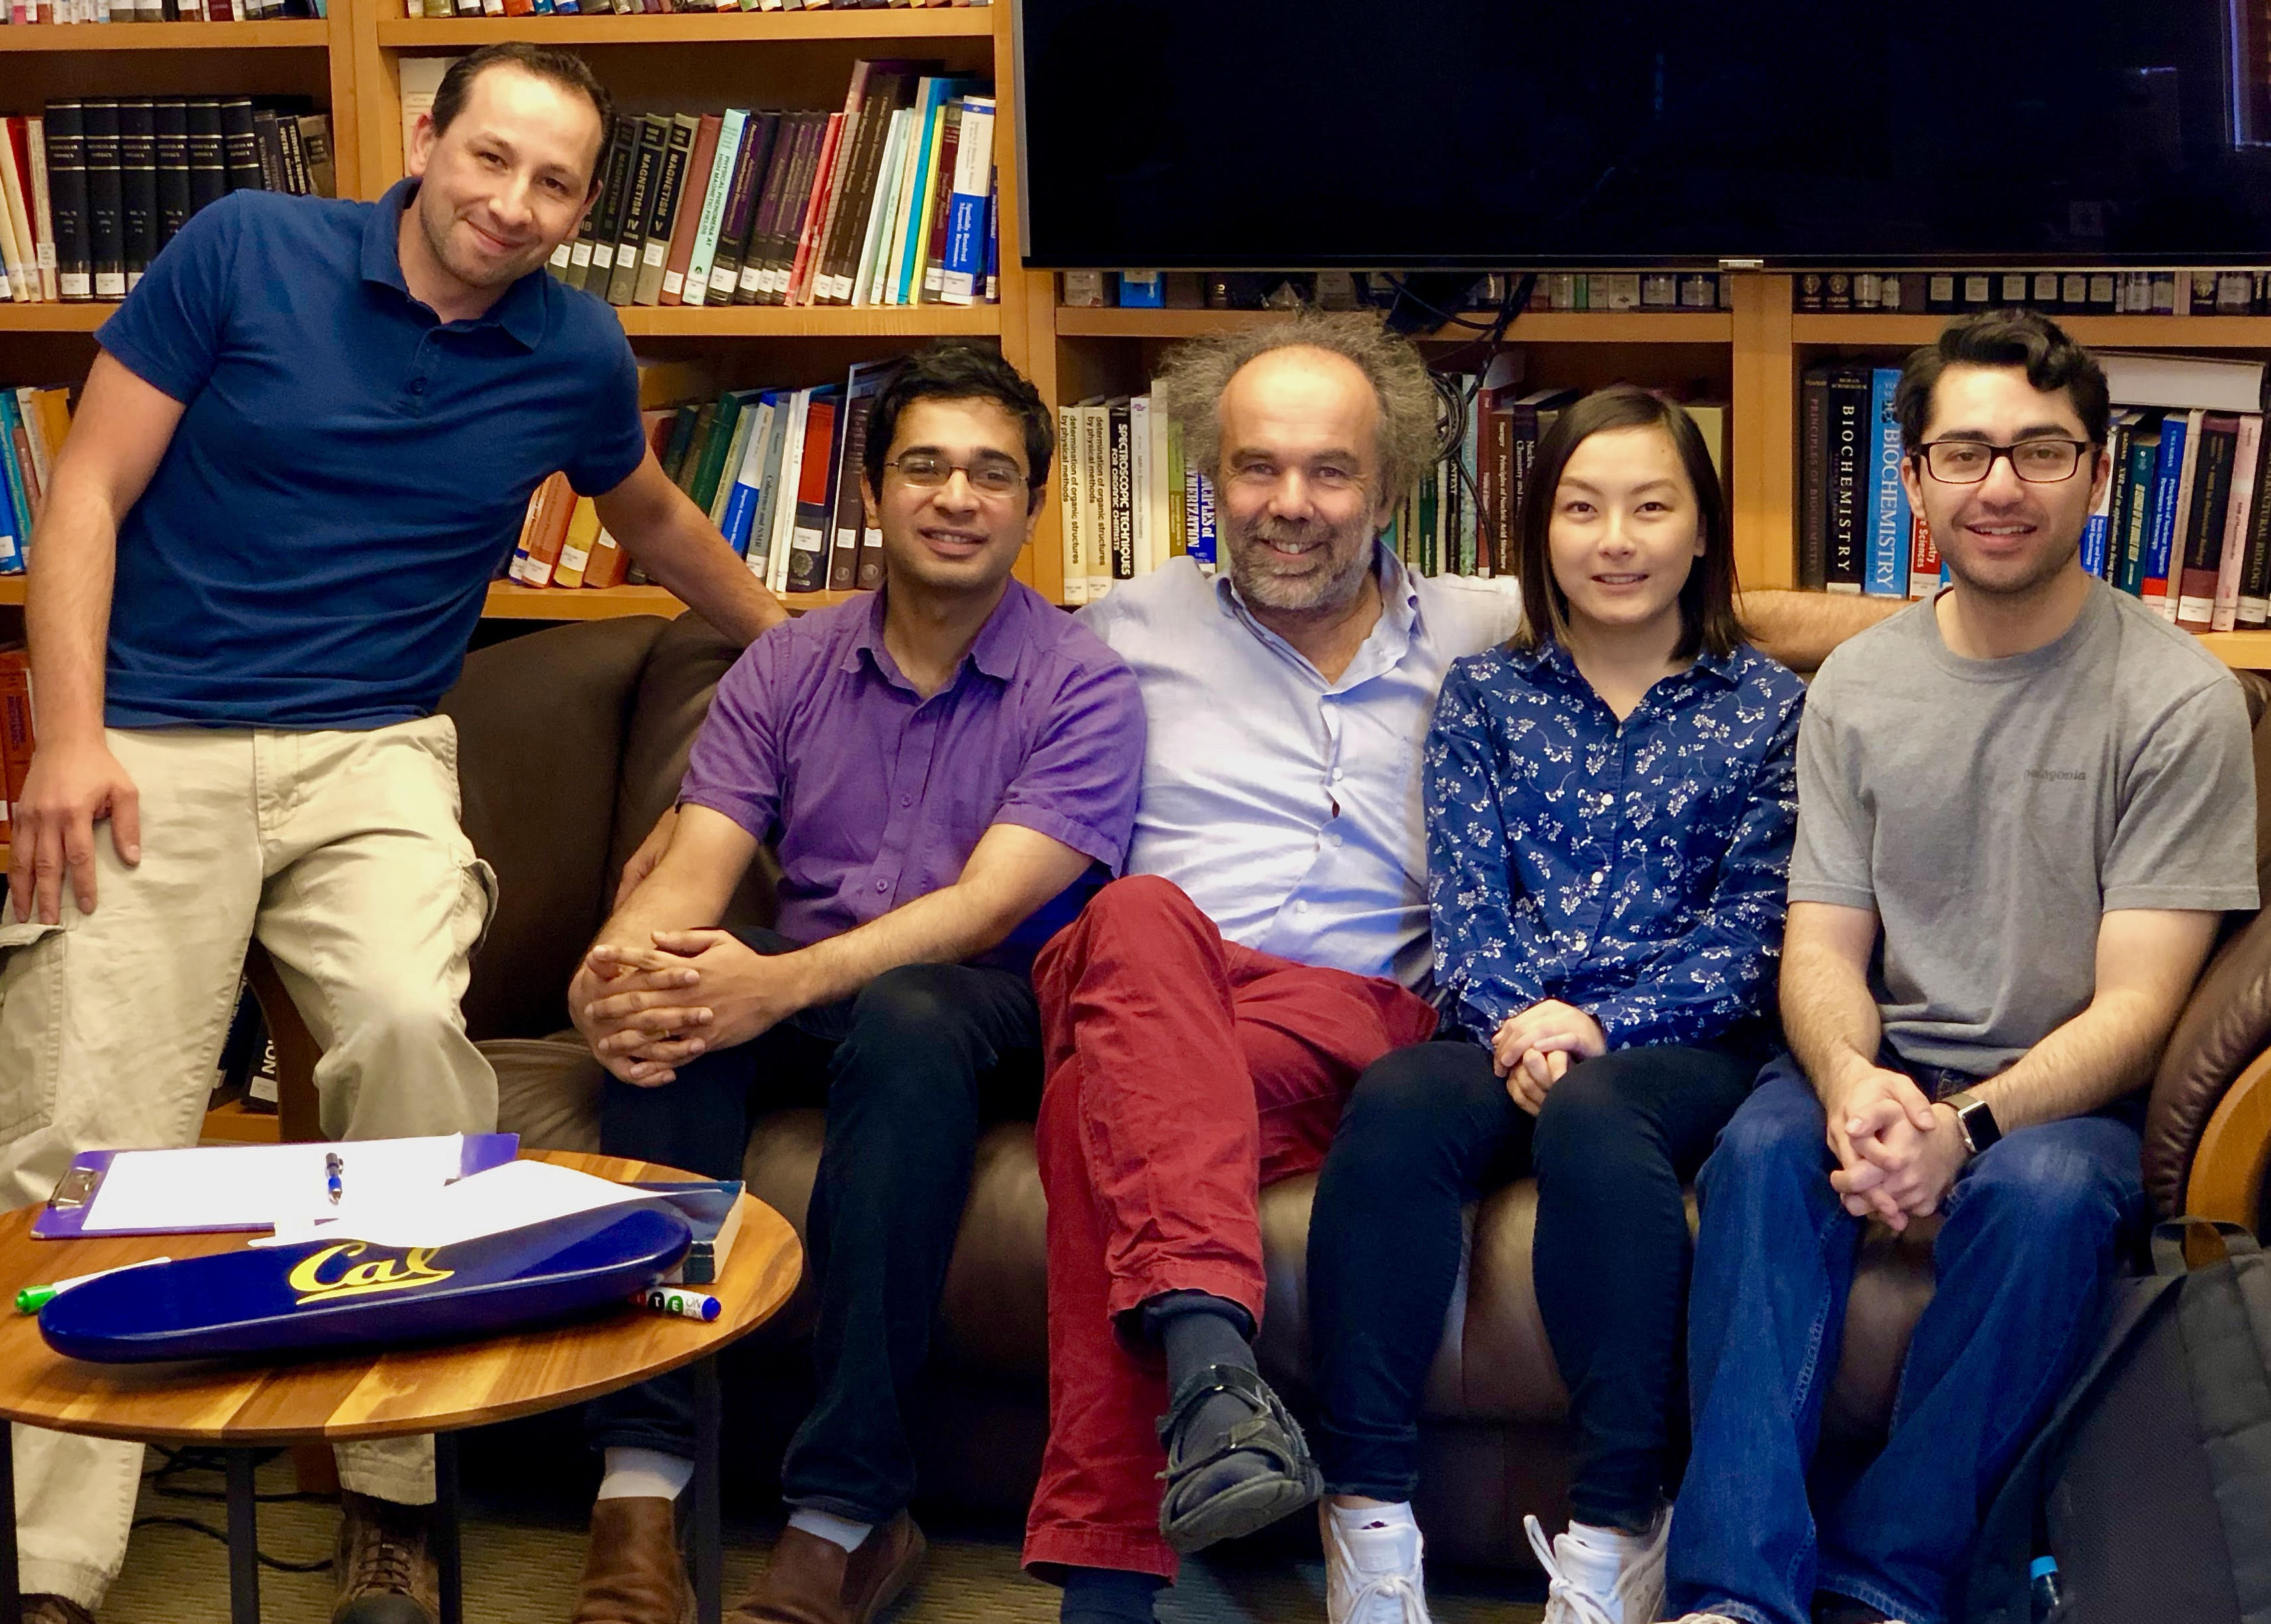 Photo - From left: Emanuel Druga, Ashok Ajoy, Dieter Suter, Kristina Liu, and Raffi Nazaryan were part of an international team led by Alex Pines that discovered how to exploit defects in powdered diamonds in a way that could strongly enhance the sensitivity of MRI and NMR machines. (Credit: Berkeley Lab, UC Berkeley)